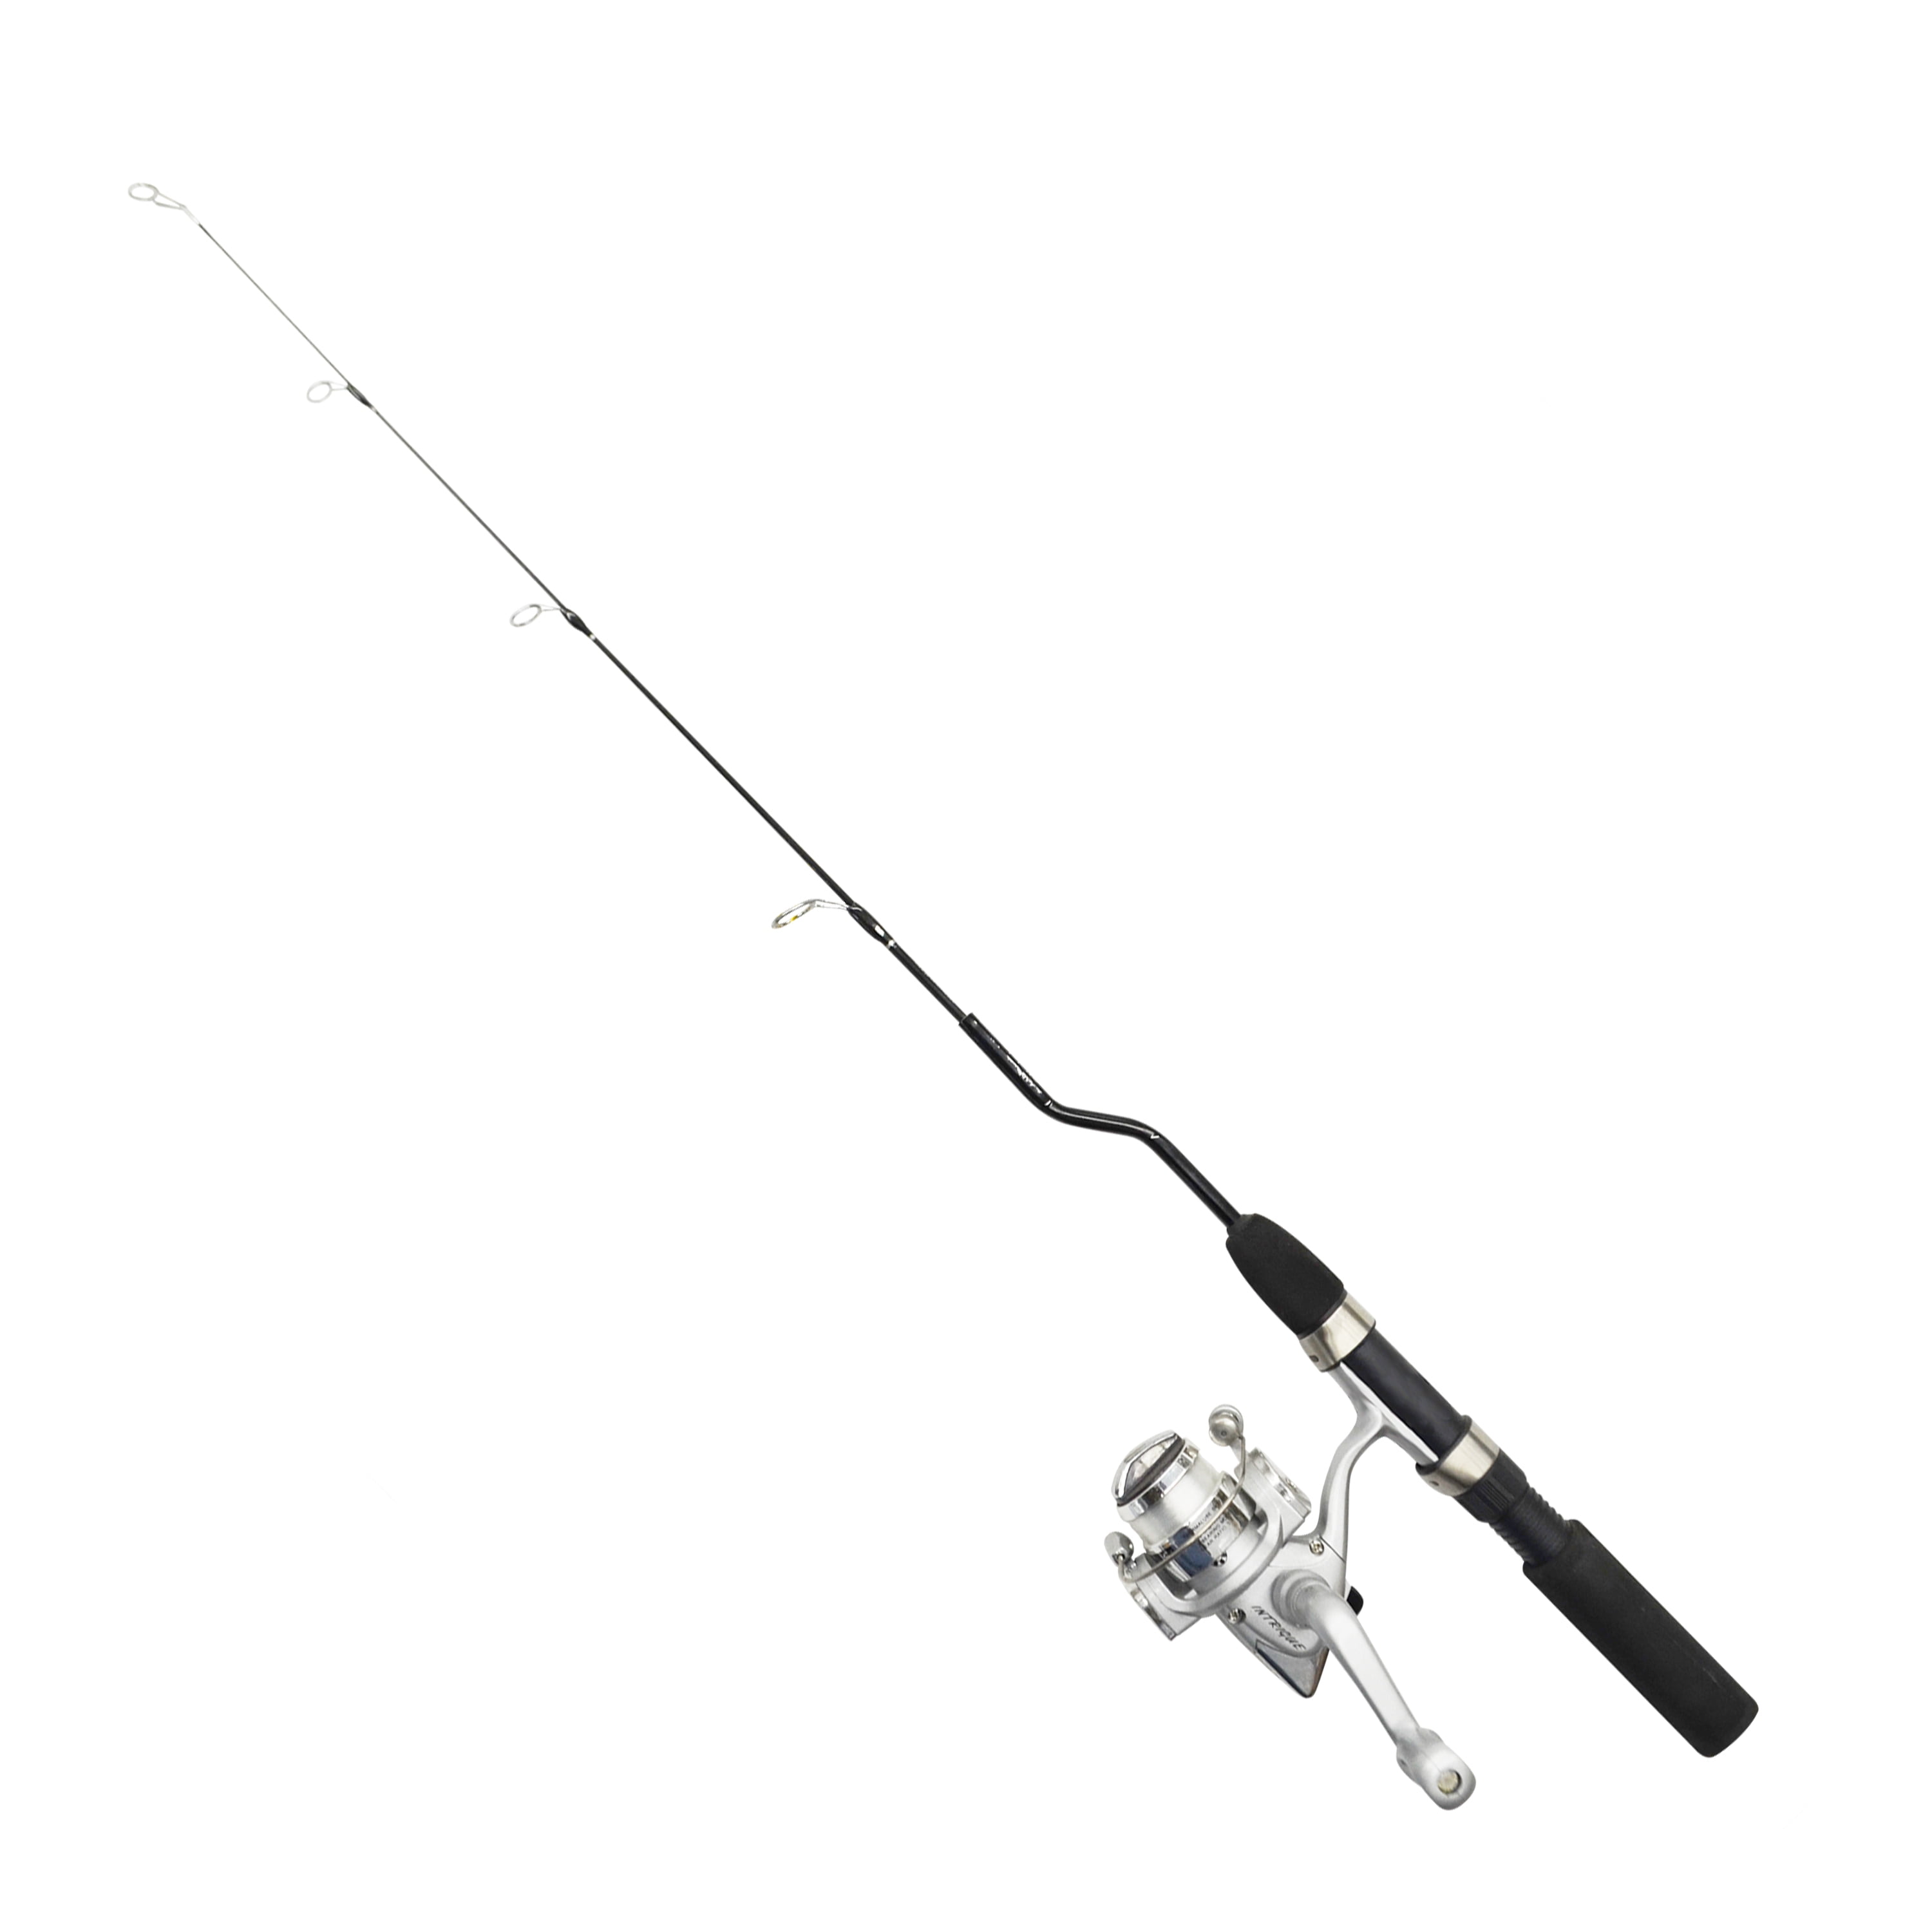 shop online discounts Premax Vintage Ice Fishing Rod and Reel